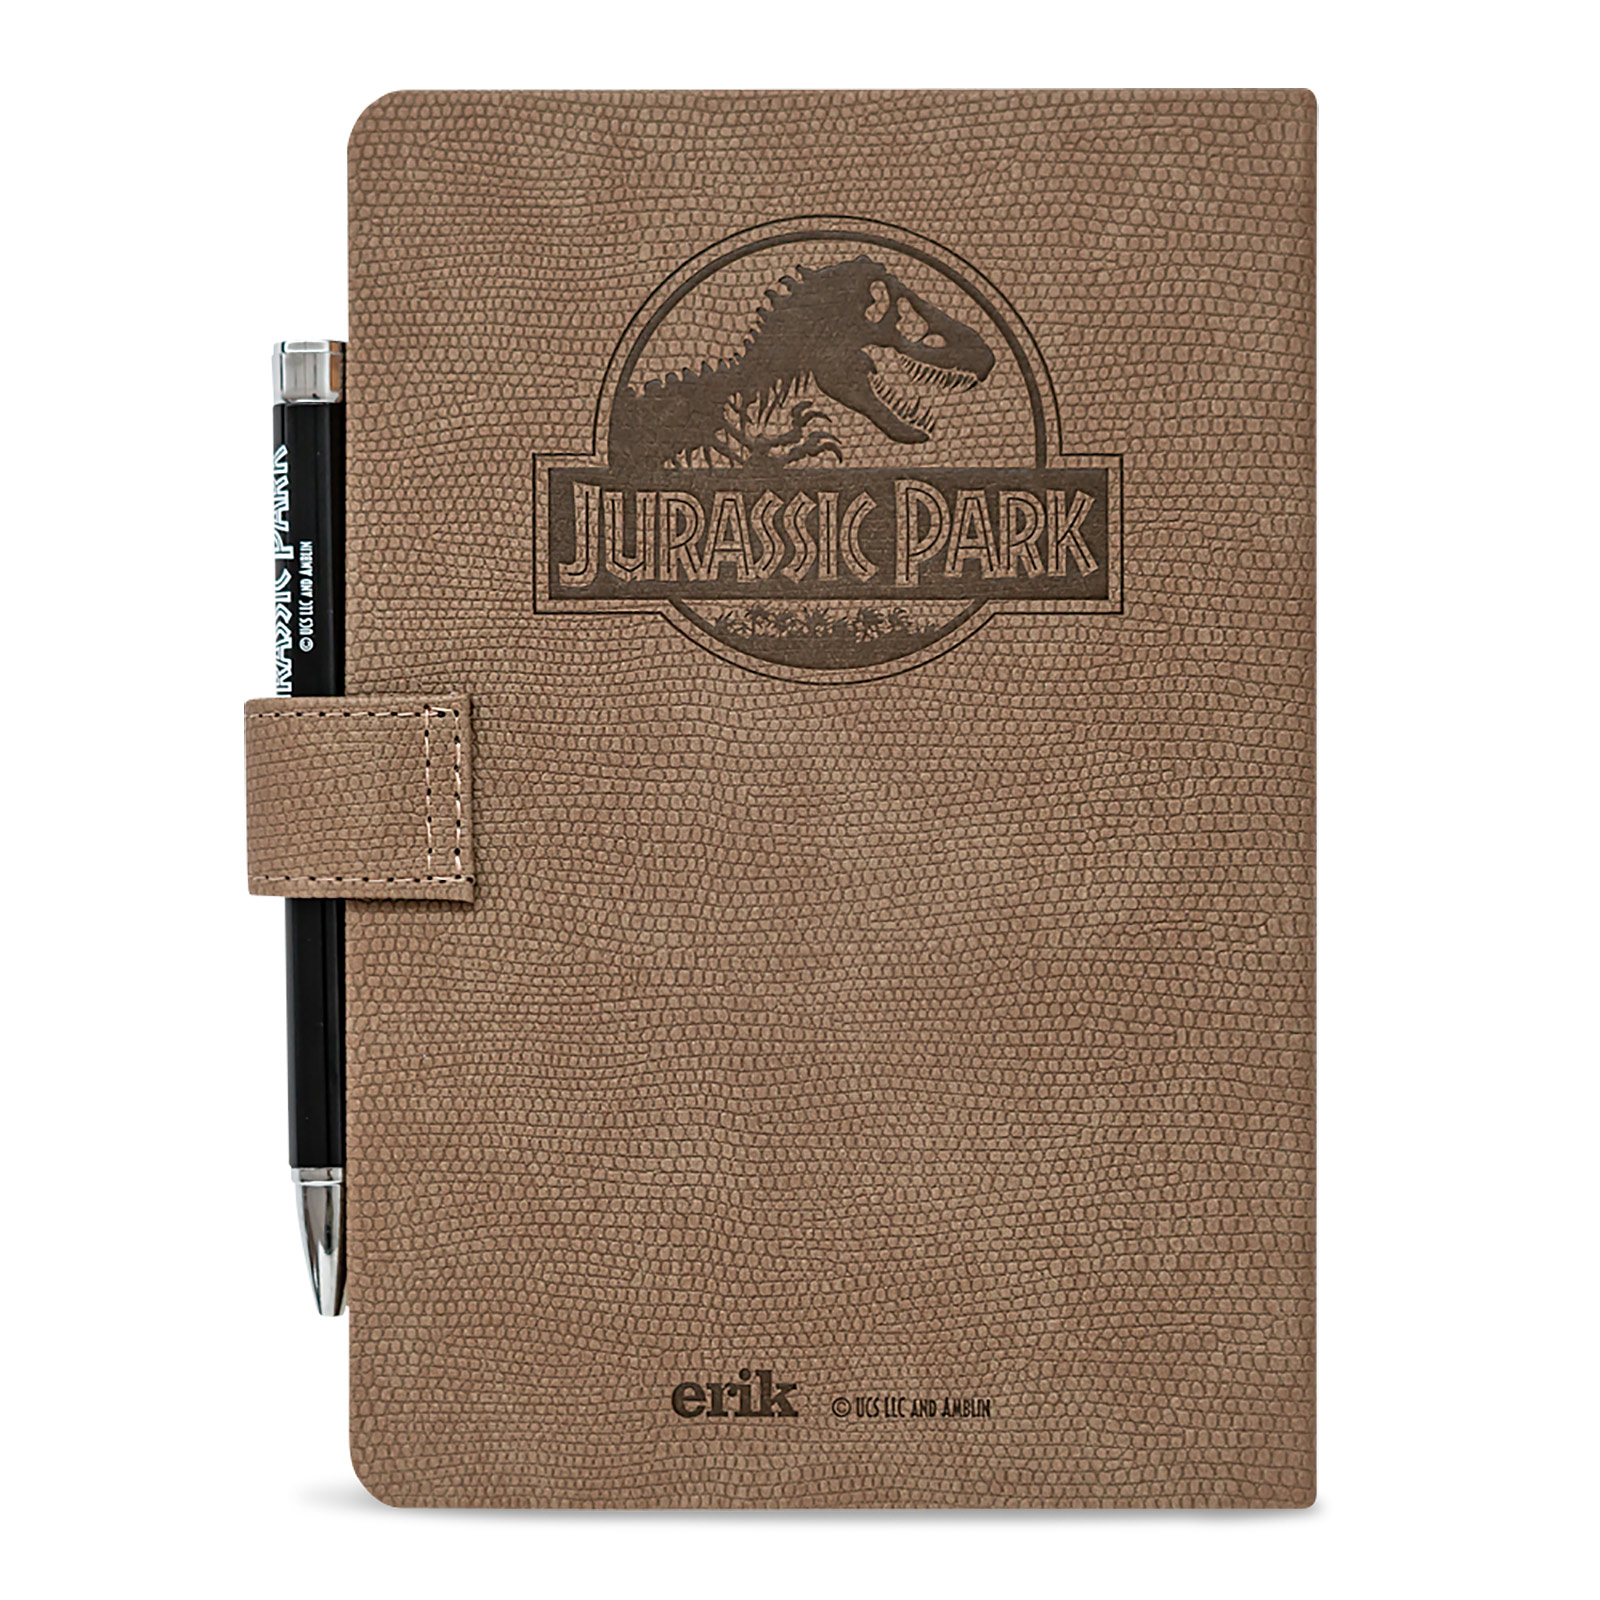 Jurassic Park - Welcome Notebook A5 with Ballpoint Pen